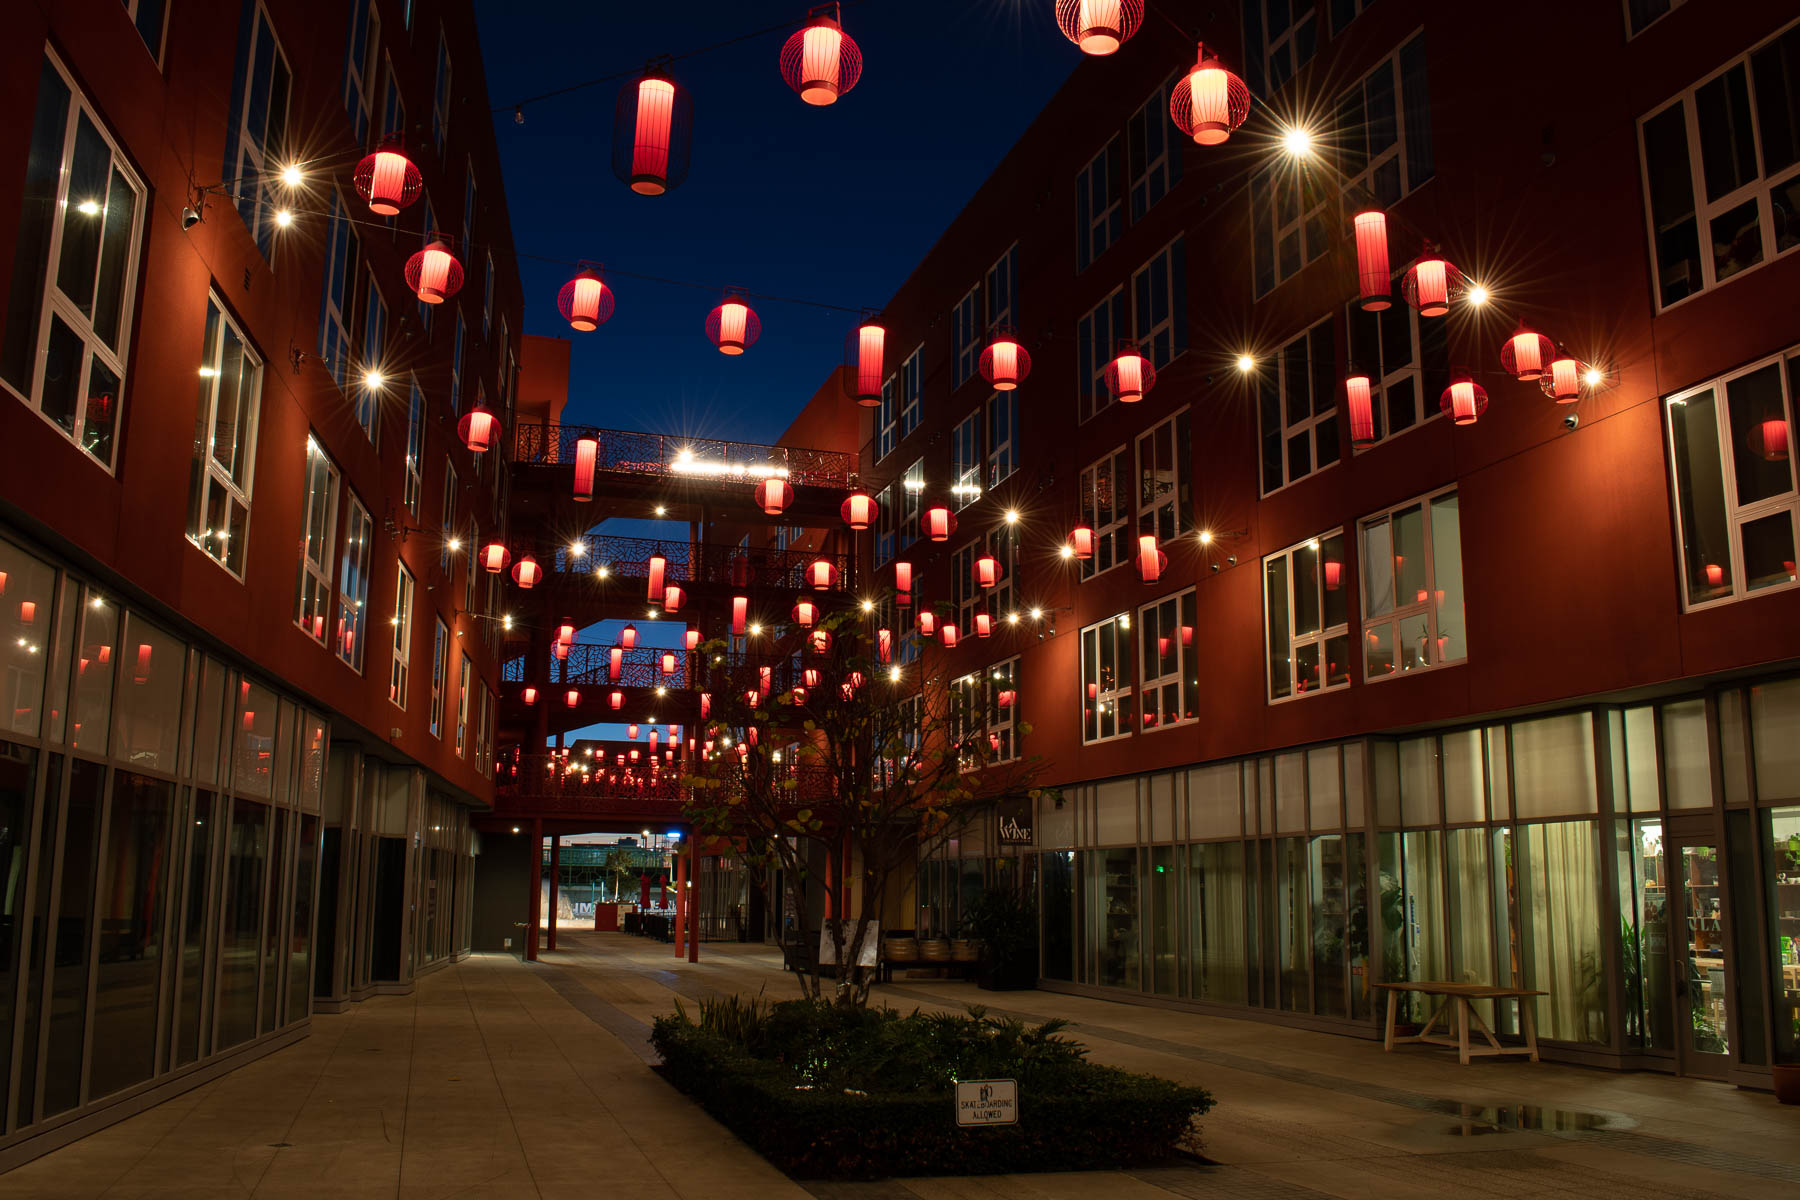 Retail space - buildings and pathway at night with lights